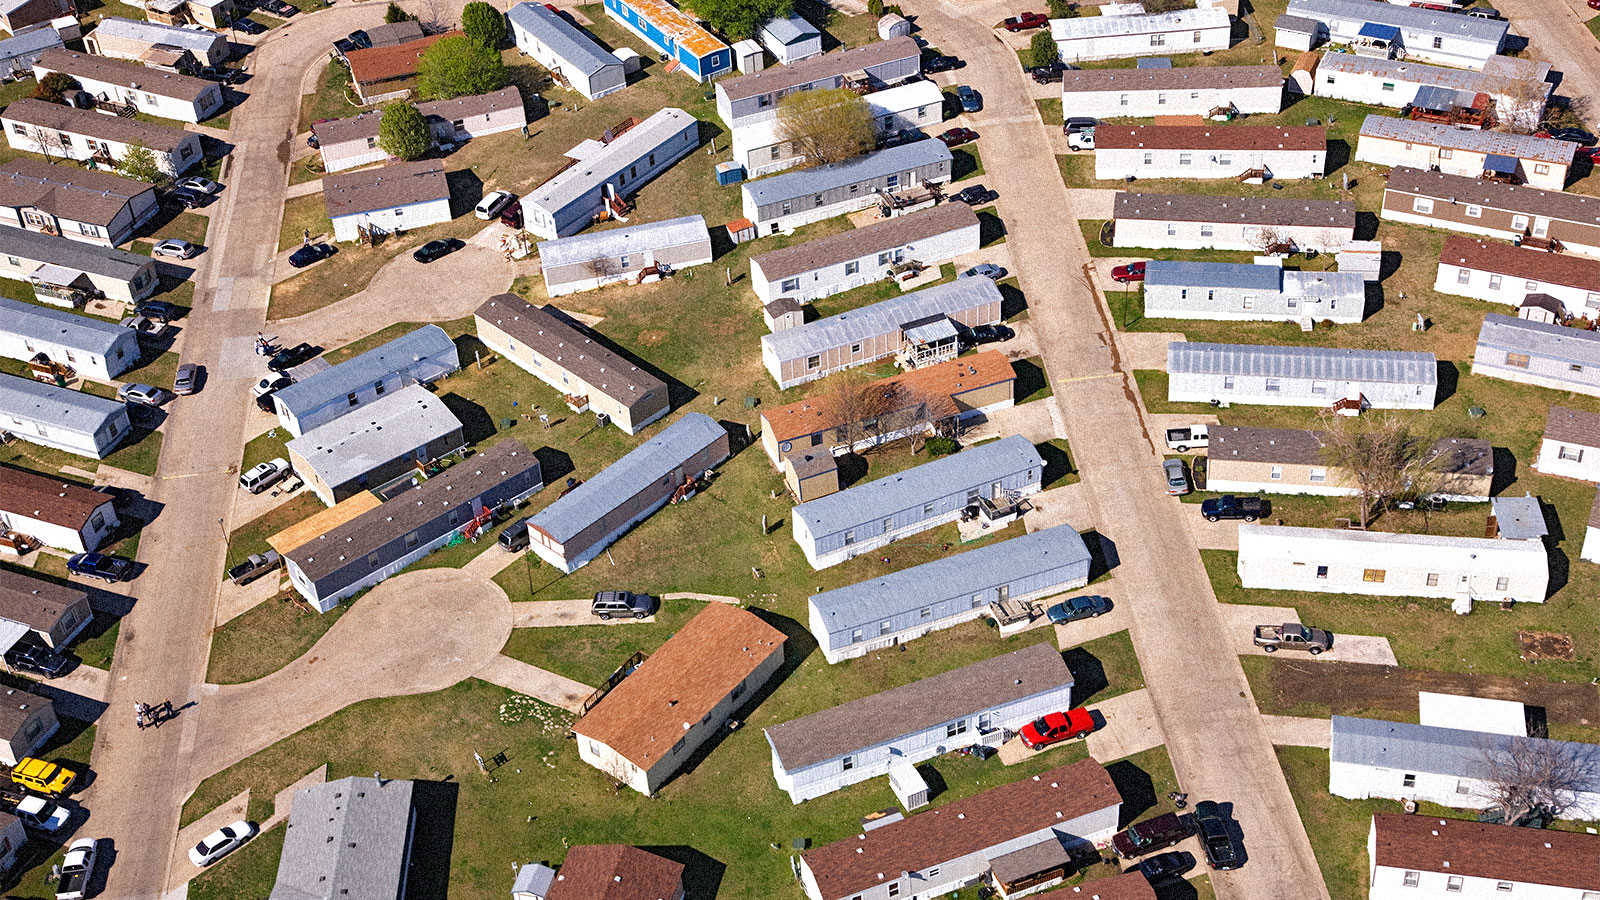 Aerial view of a mobile home park in Texas